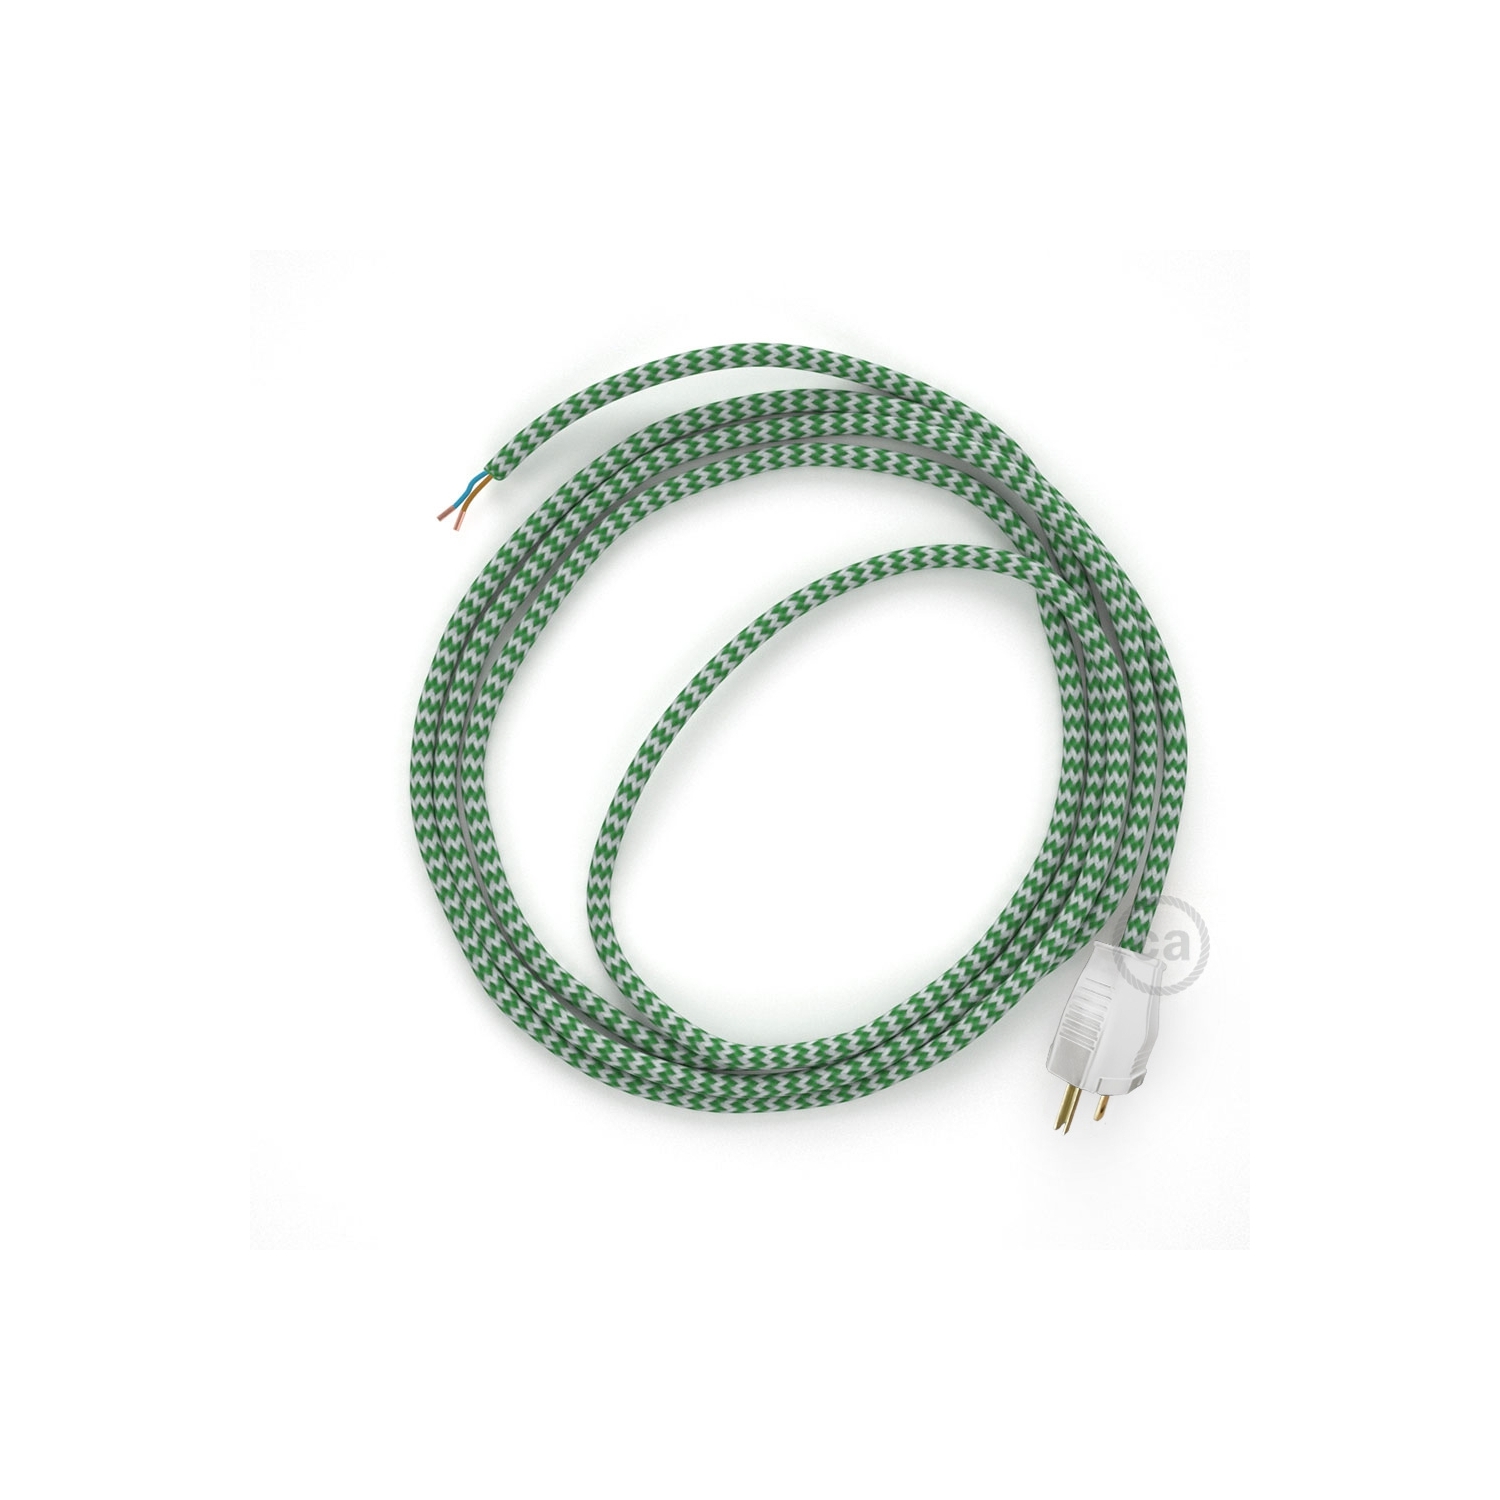 Cord-set - RZ06 Green & White Chevron Covered Round Cable